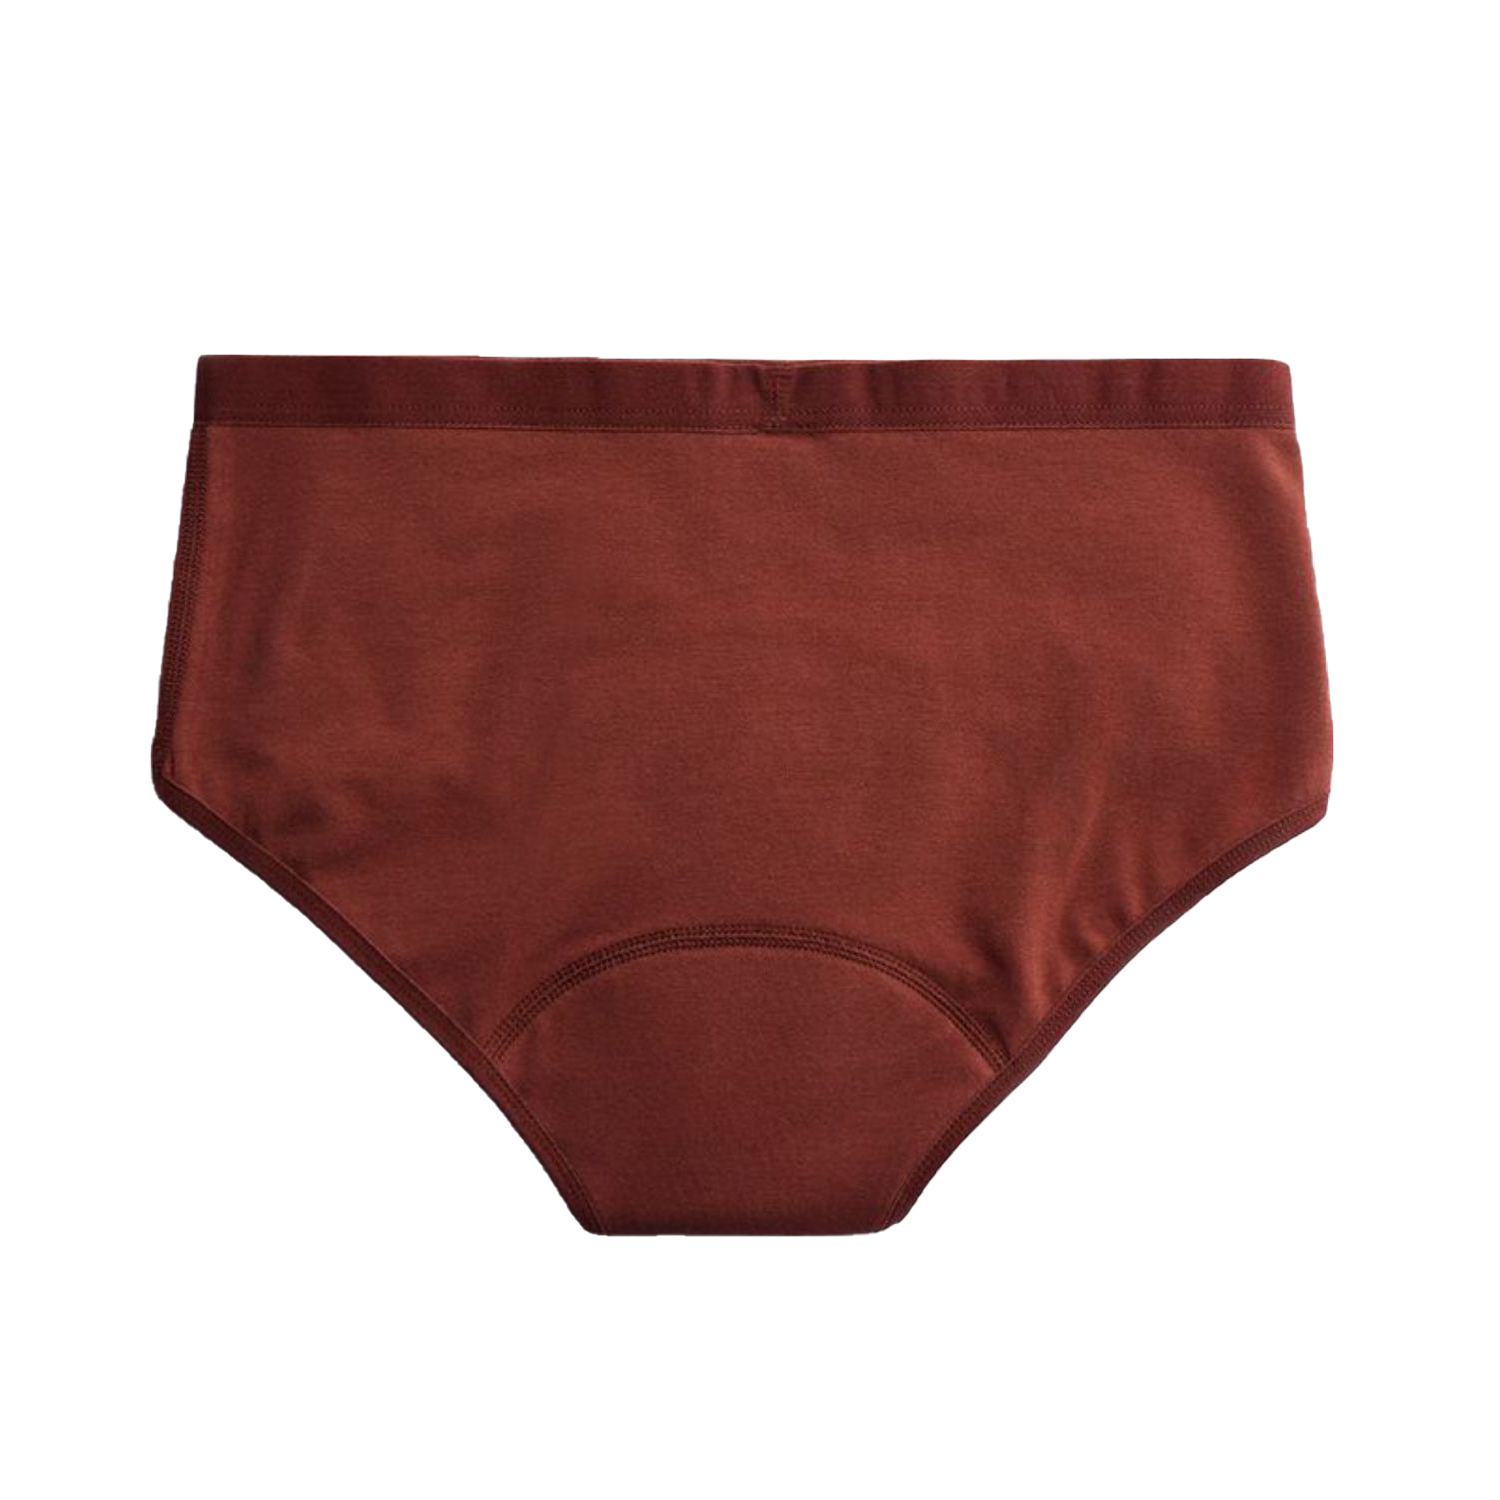 Imse (by ImseVimse) Period Underwear – Hipster Medium Flow (Size: L / Color: Rusty Bordeaux)